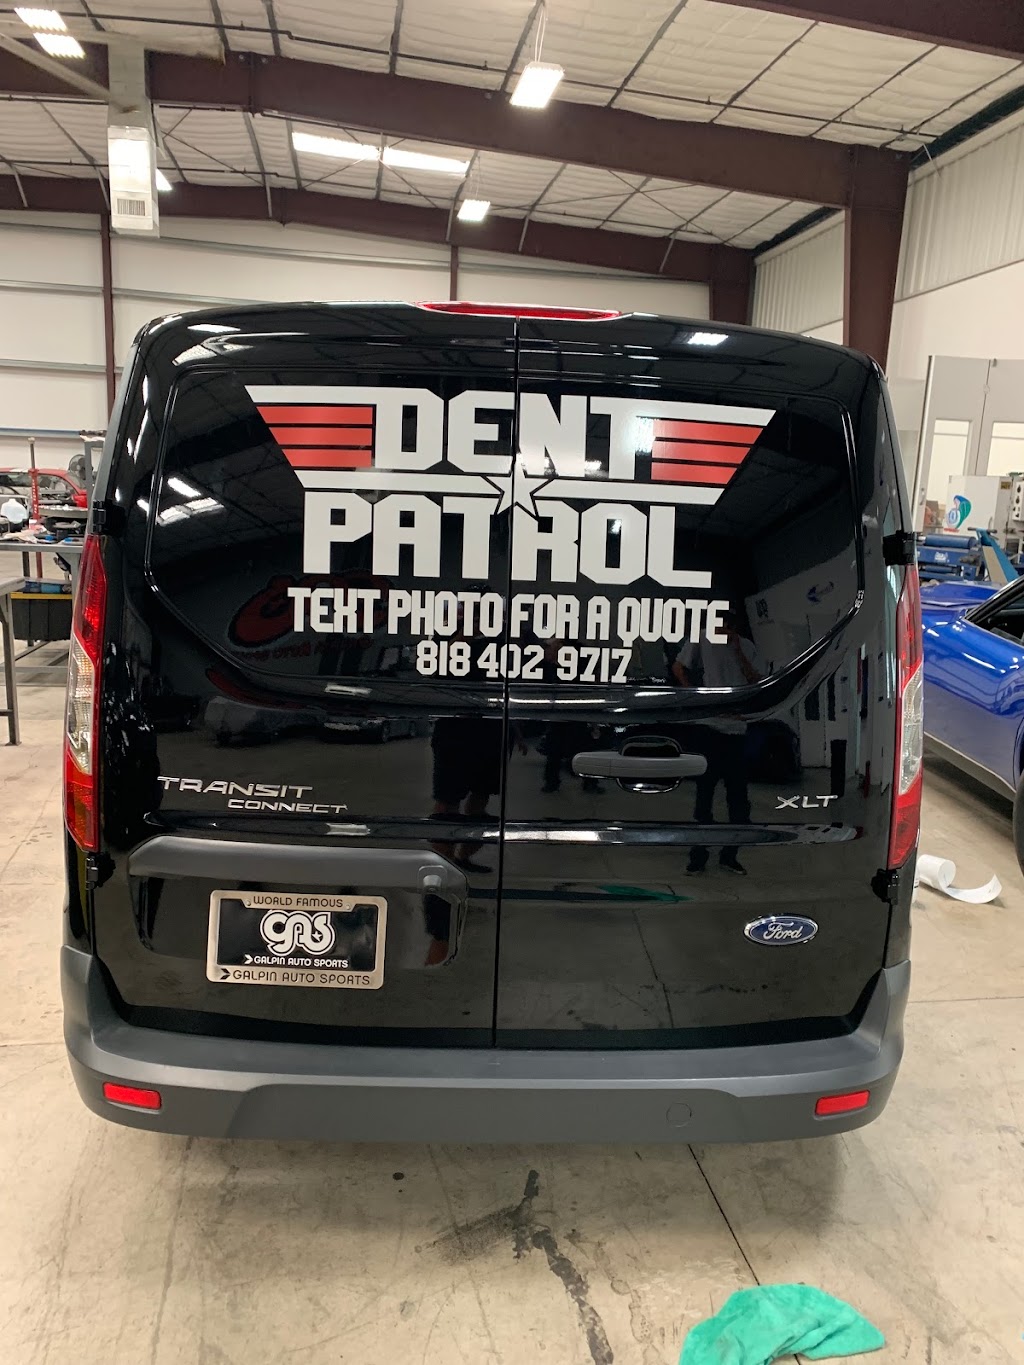 Dent Patrol Inc | Mobile Service, 5893 Mustang Dr, Simi Valley, CA 93063, USA | Phone: (818) 402-9717